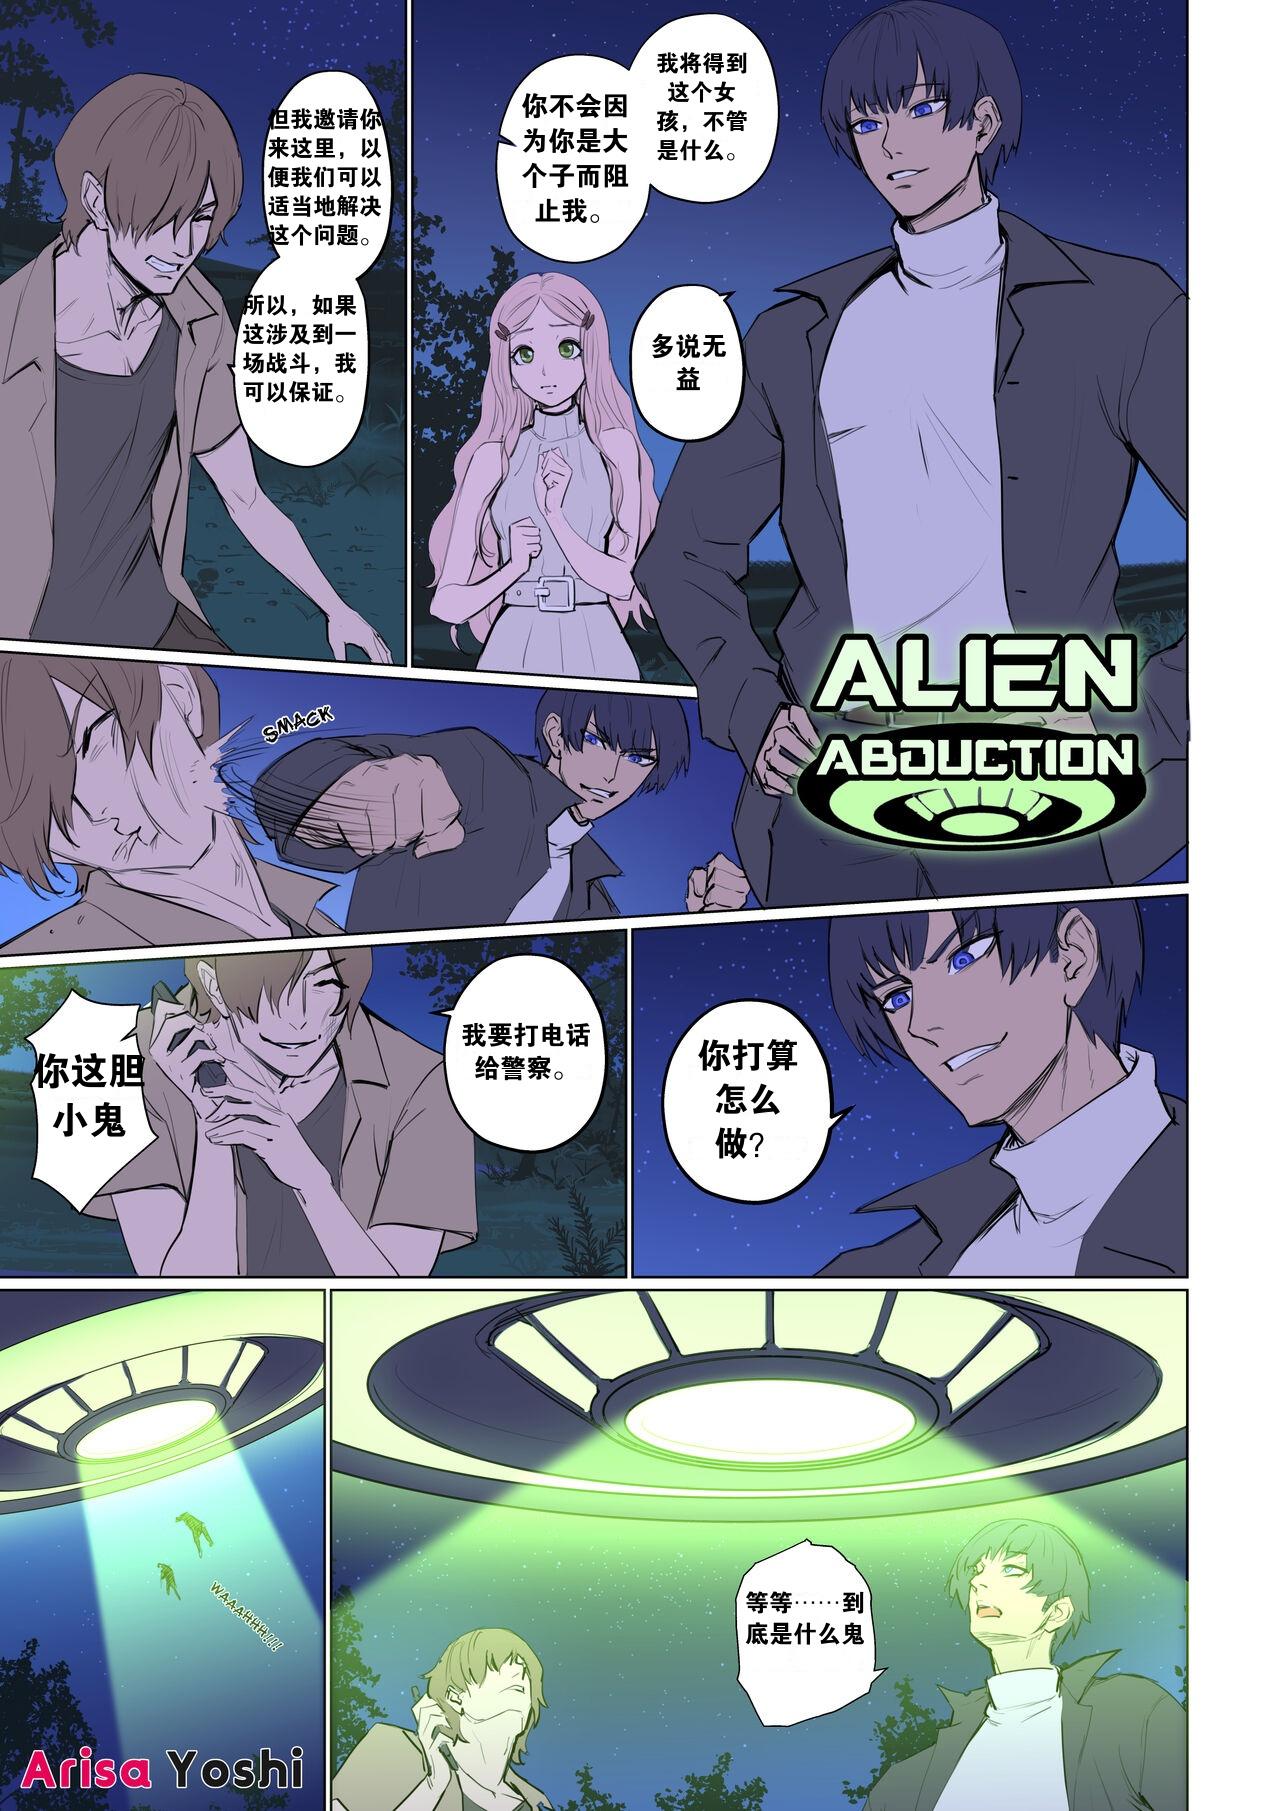 Girl Alien Abduction 1 Stretch - Page 2